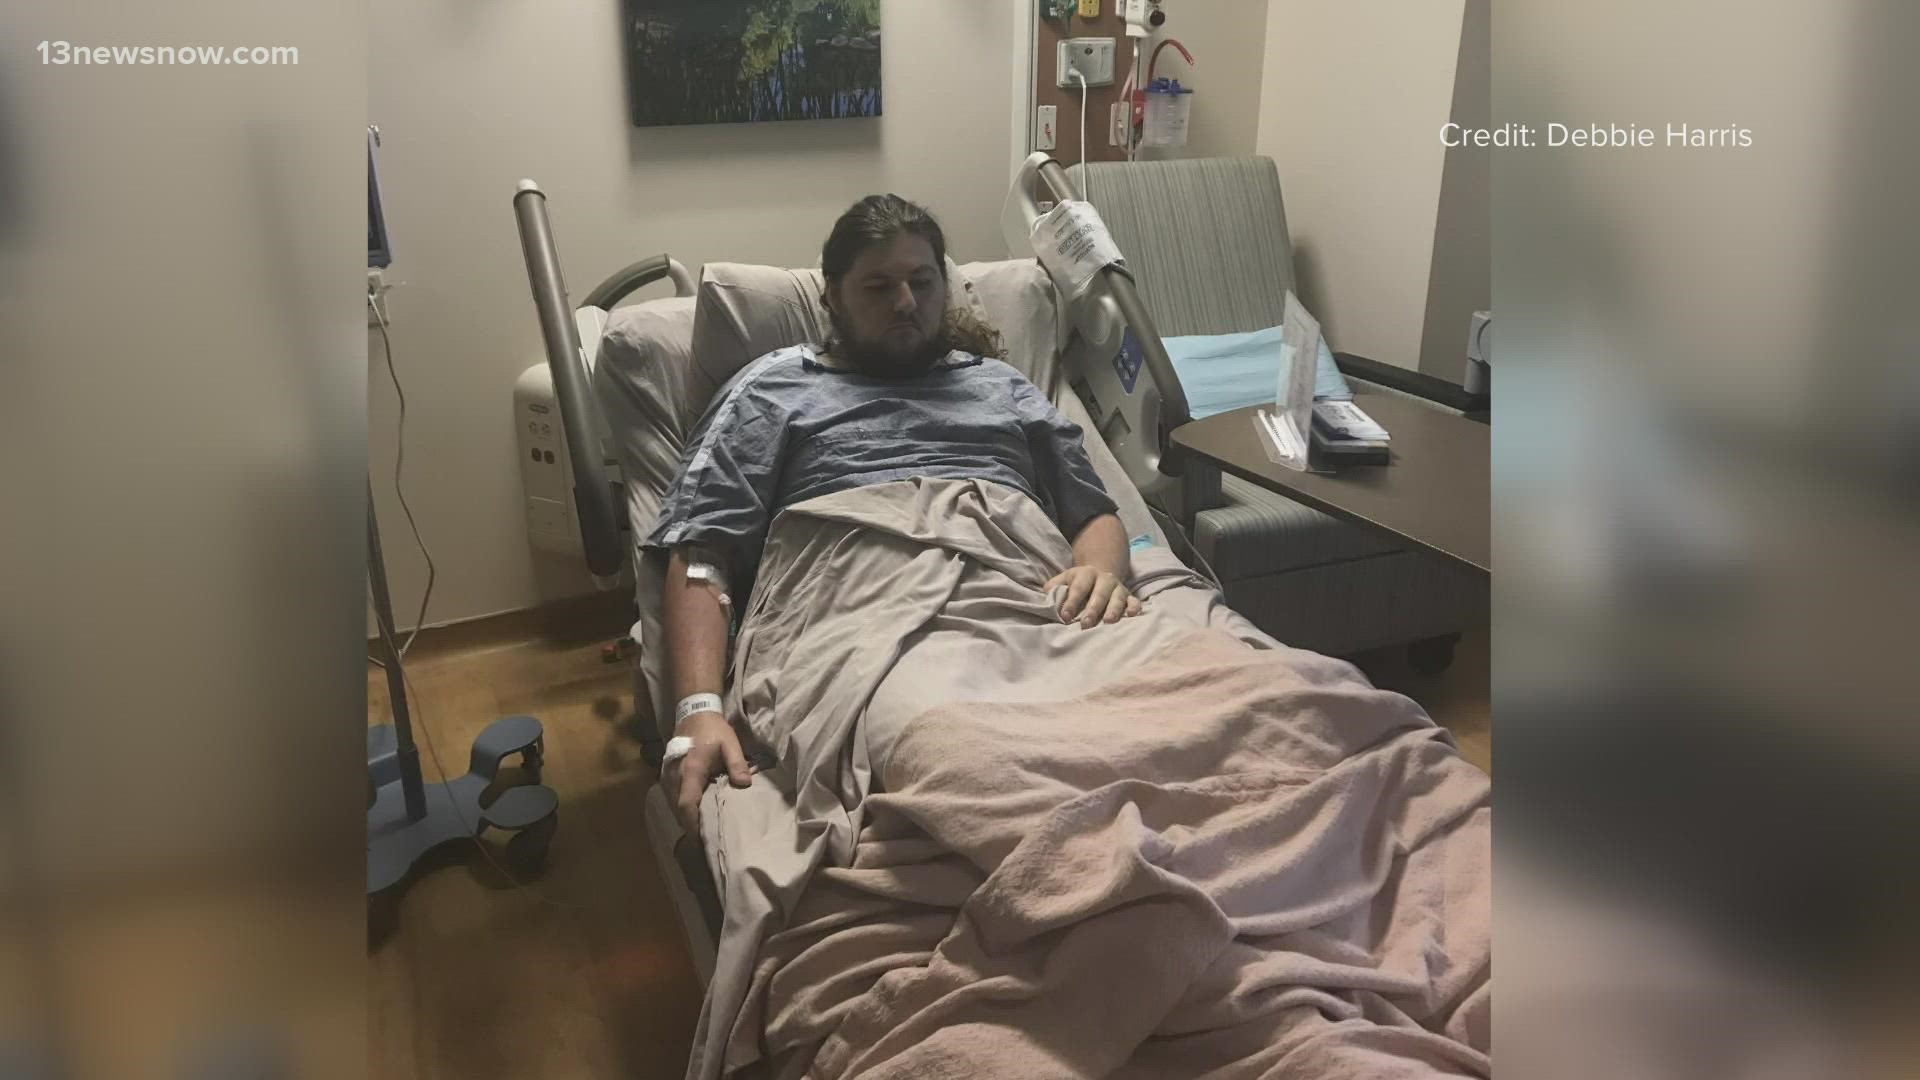 Debbie Harris's son, Jesse, had to go to the emergency room for gallbladder problems. She says it was scary seeing the hospital staff overwhelmed with patients.